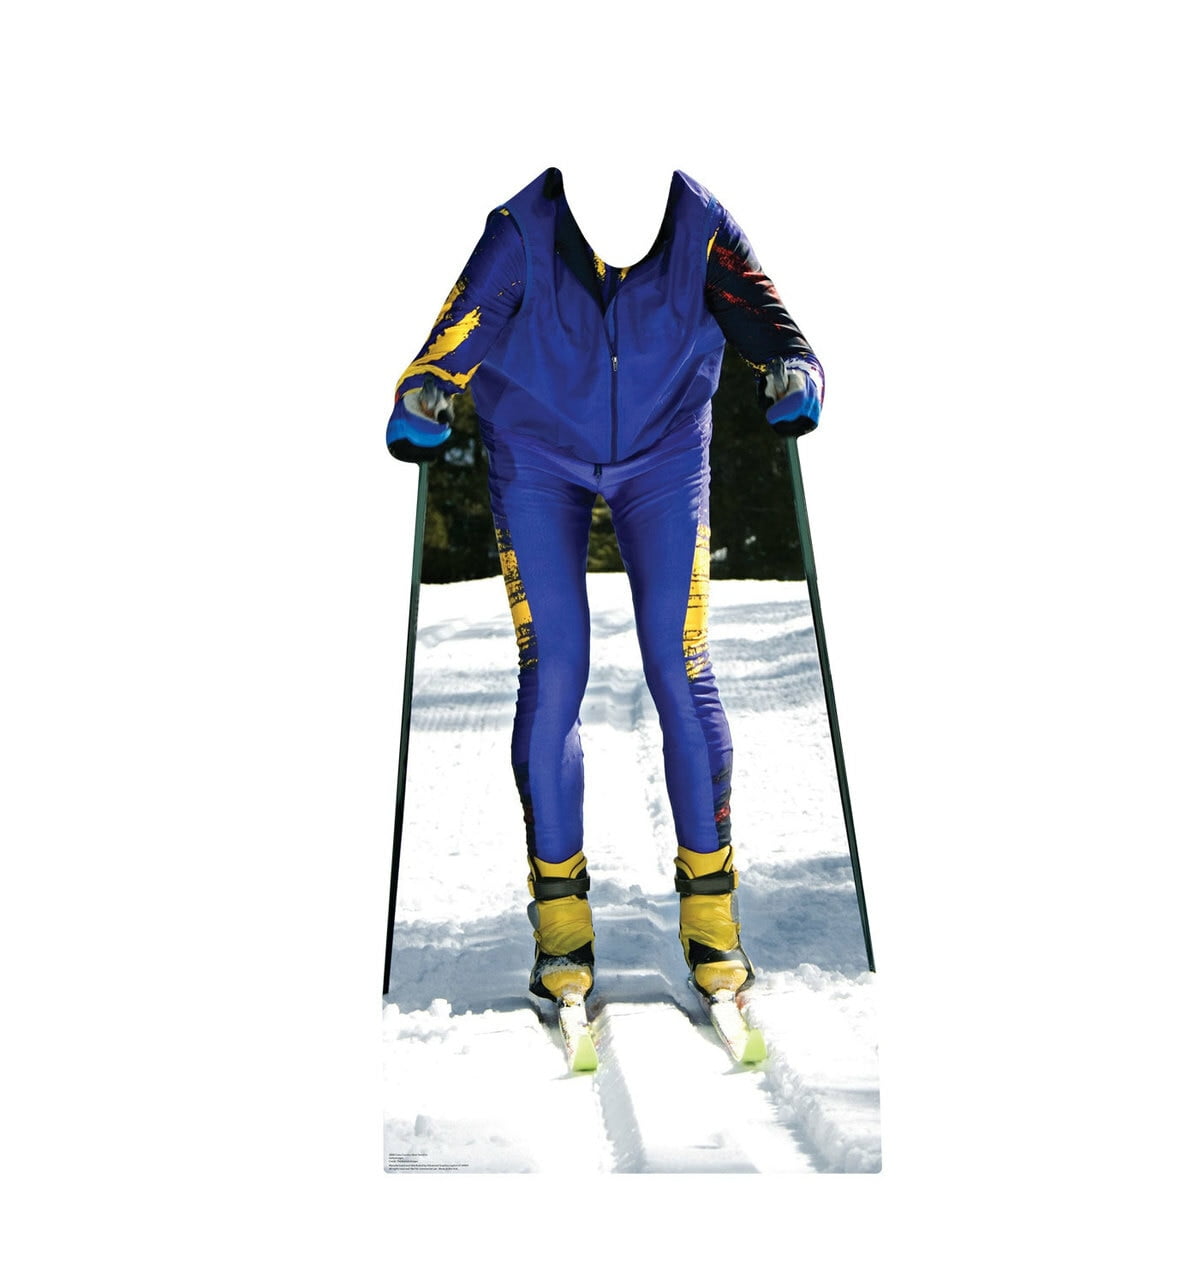 Picture of Advanced Graphics 2668 62 x 30 in. .Cross Country Skier Standin Wall Decal